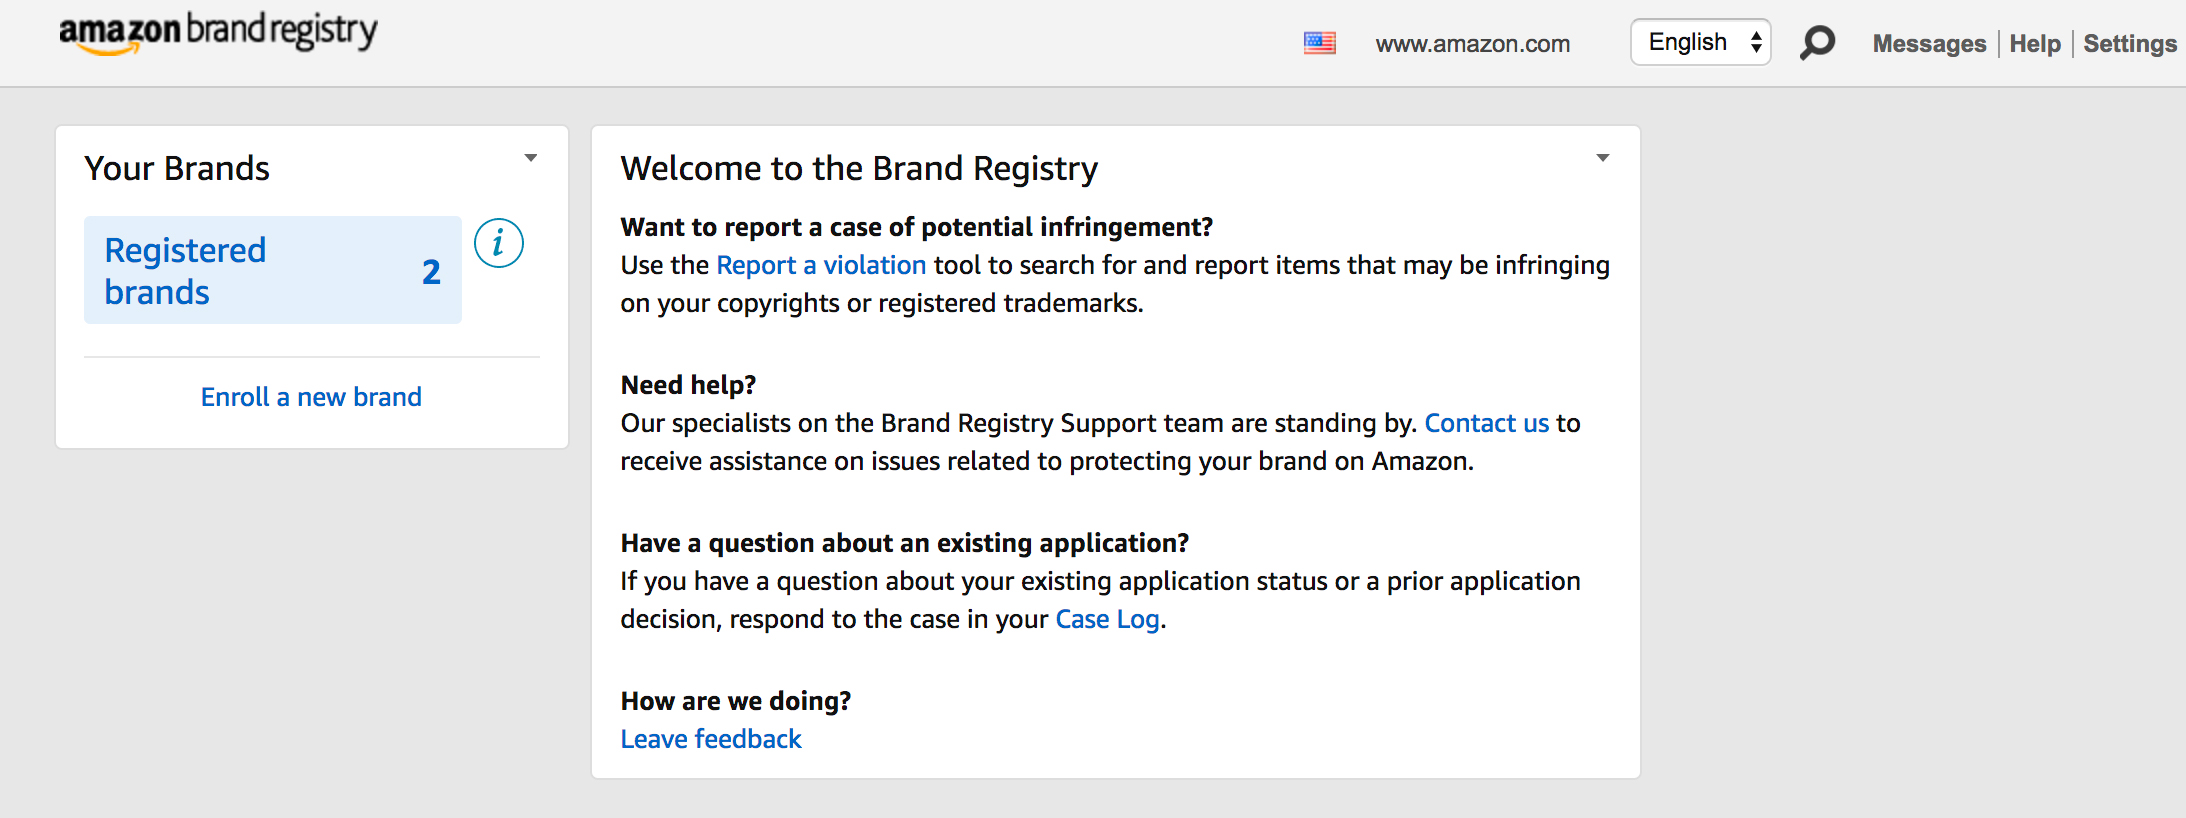 Welcome to brand registry 2.0